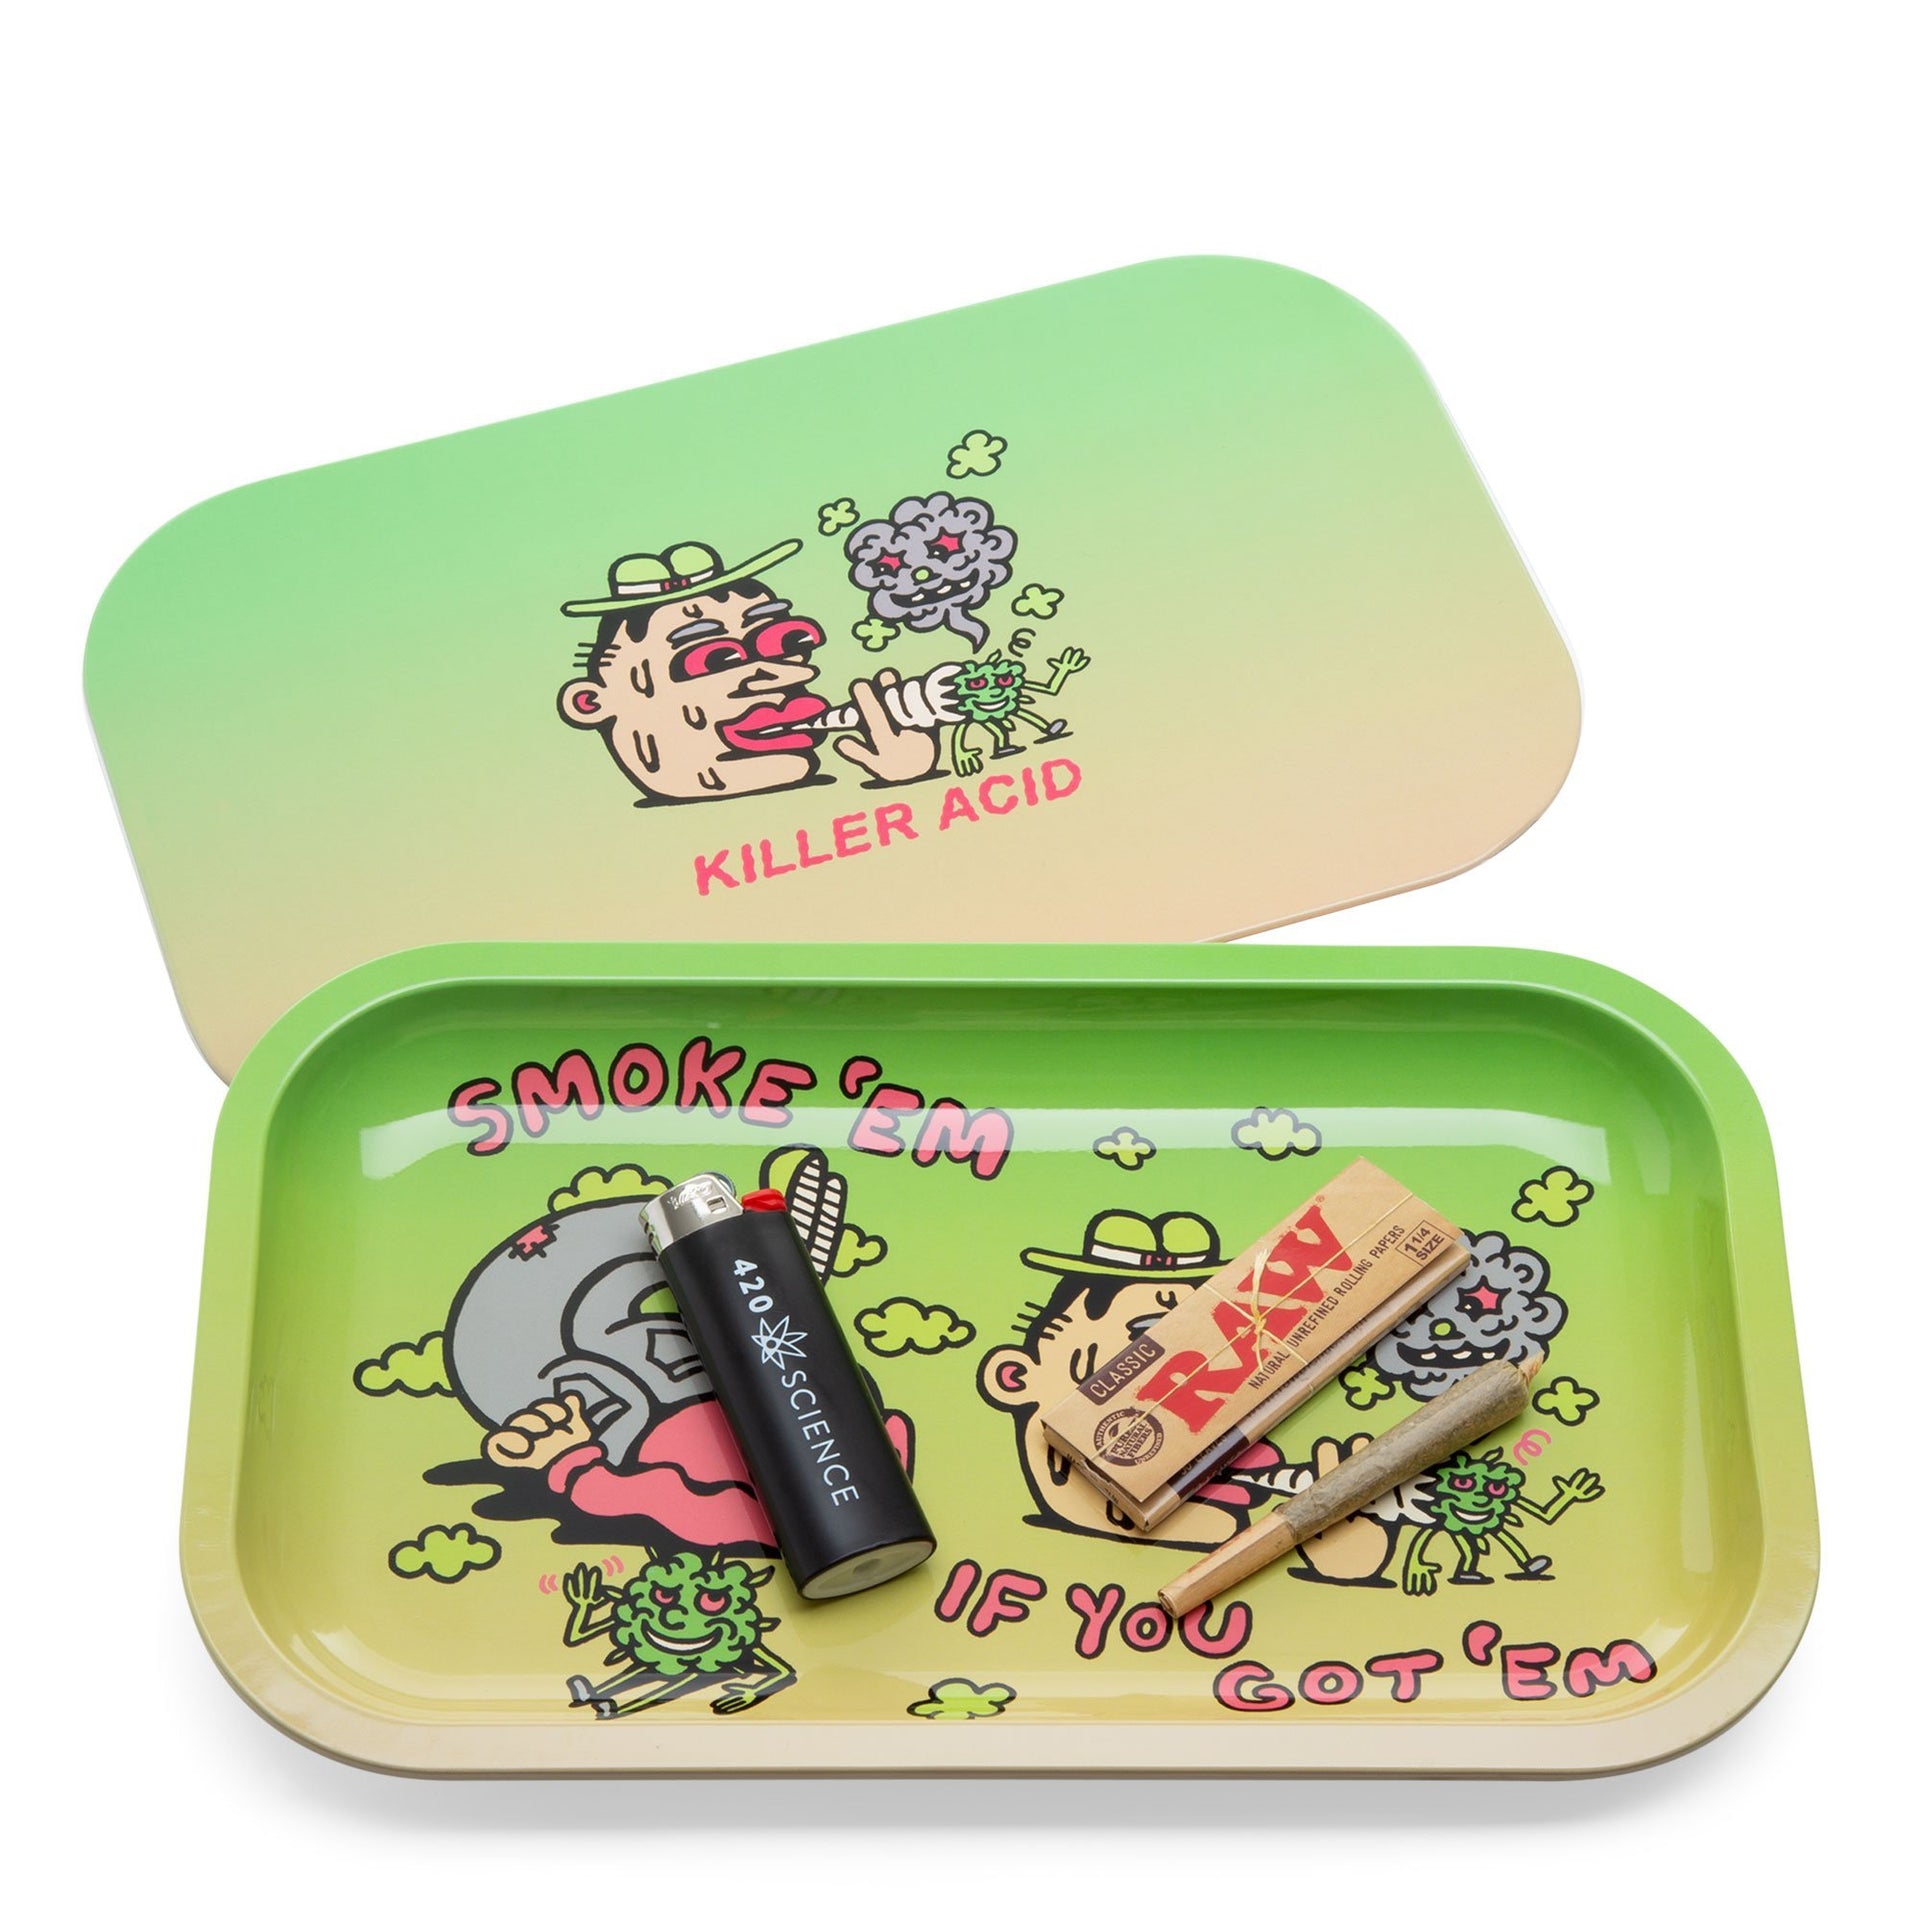 420 Science x Killer Acid Magnetic Lid Rolling Tray - Smoke Em | Rolling Trays | 420 Science